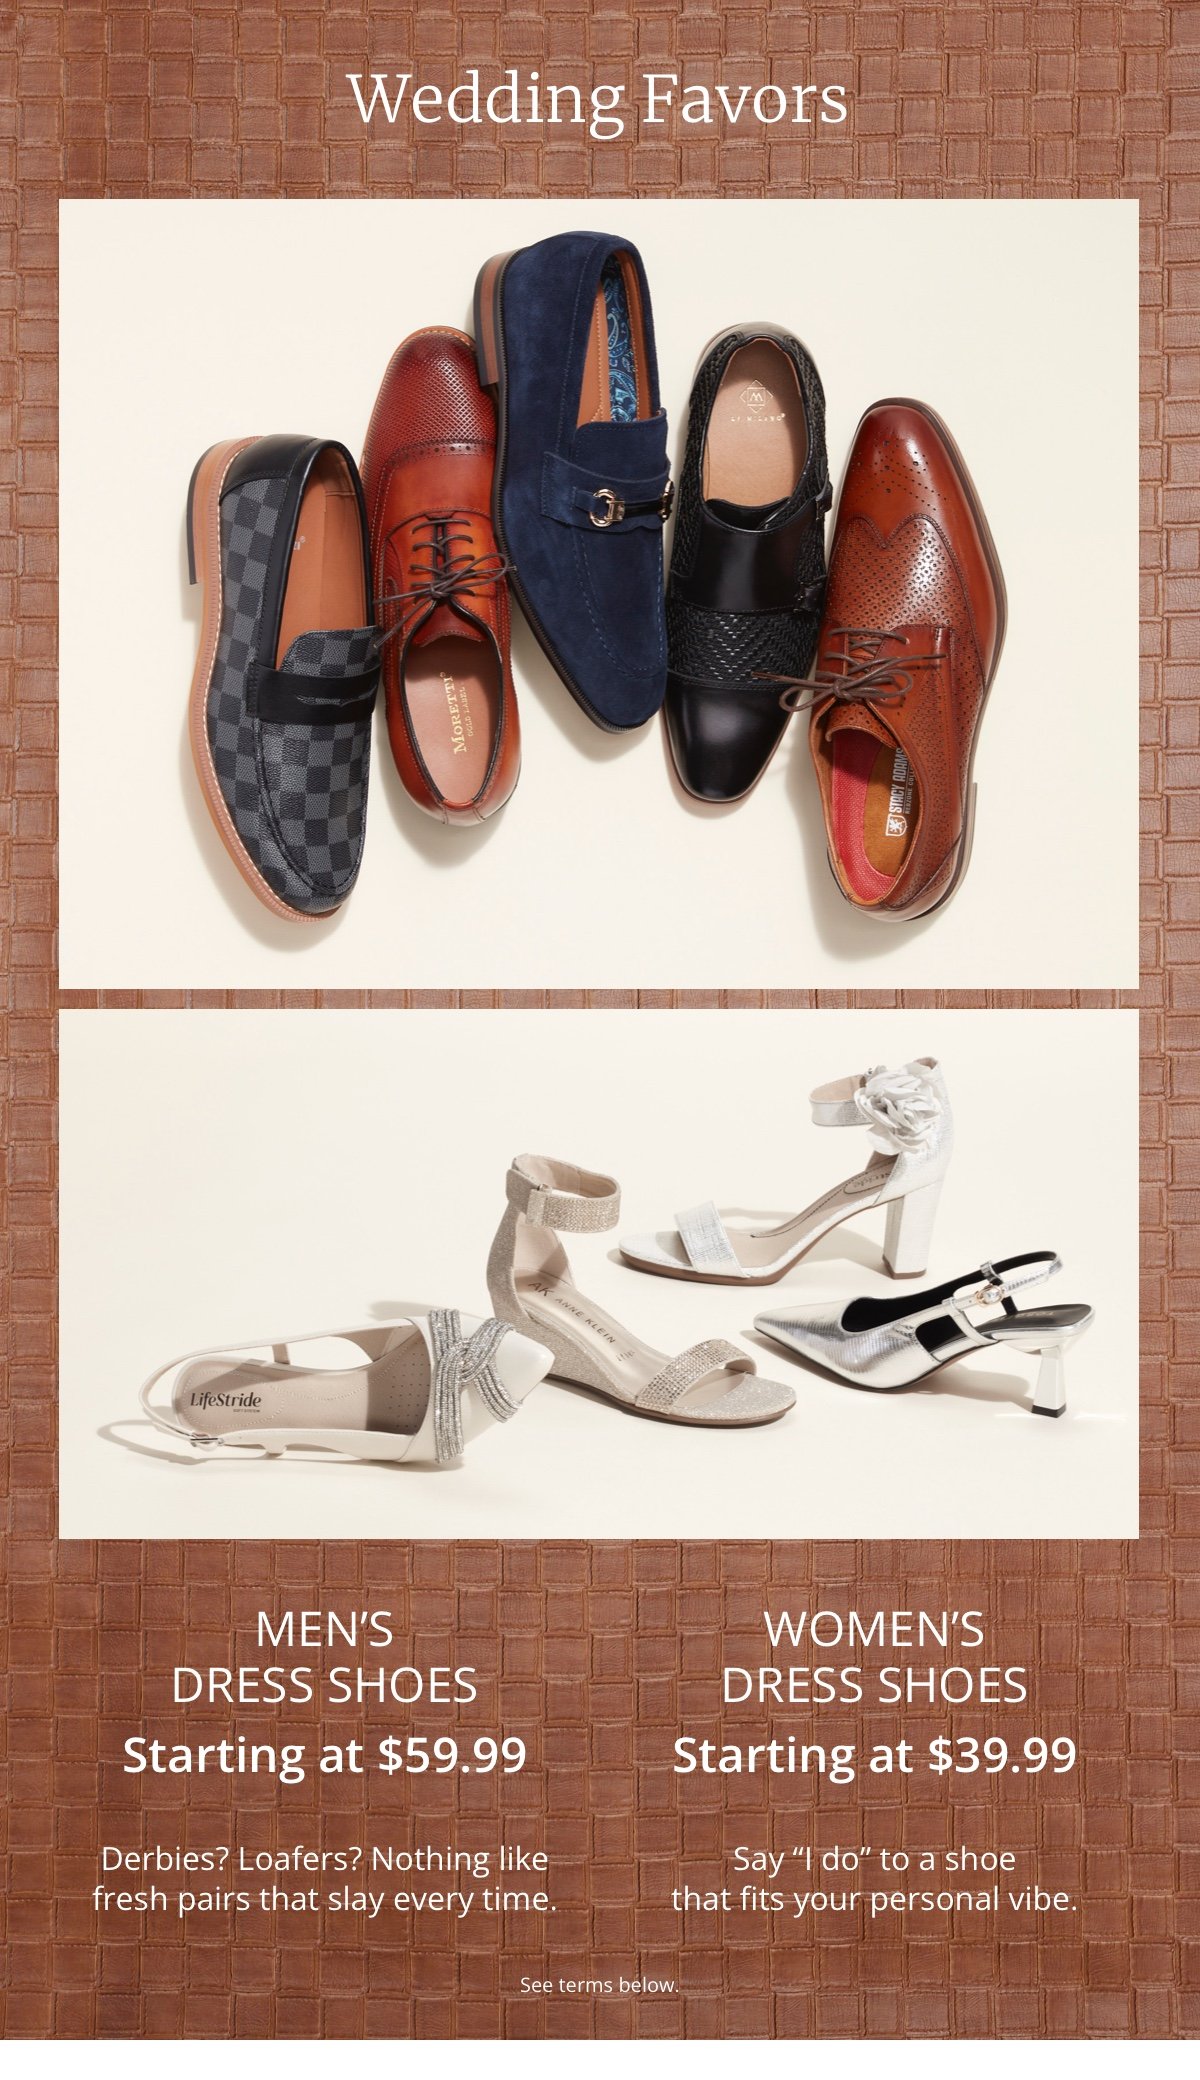 Wedding Favors|Men's Dress Shoes|Starting at \\$59.99|Derbies? Loafers? Nothing like fresh pairs that slay every time.|Women's Dress Shoes|Starting at \\$39.99|Say “I do” to a shoe that fits your personal vibe.|See terms below.